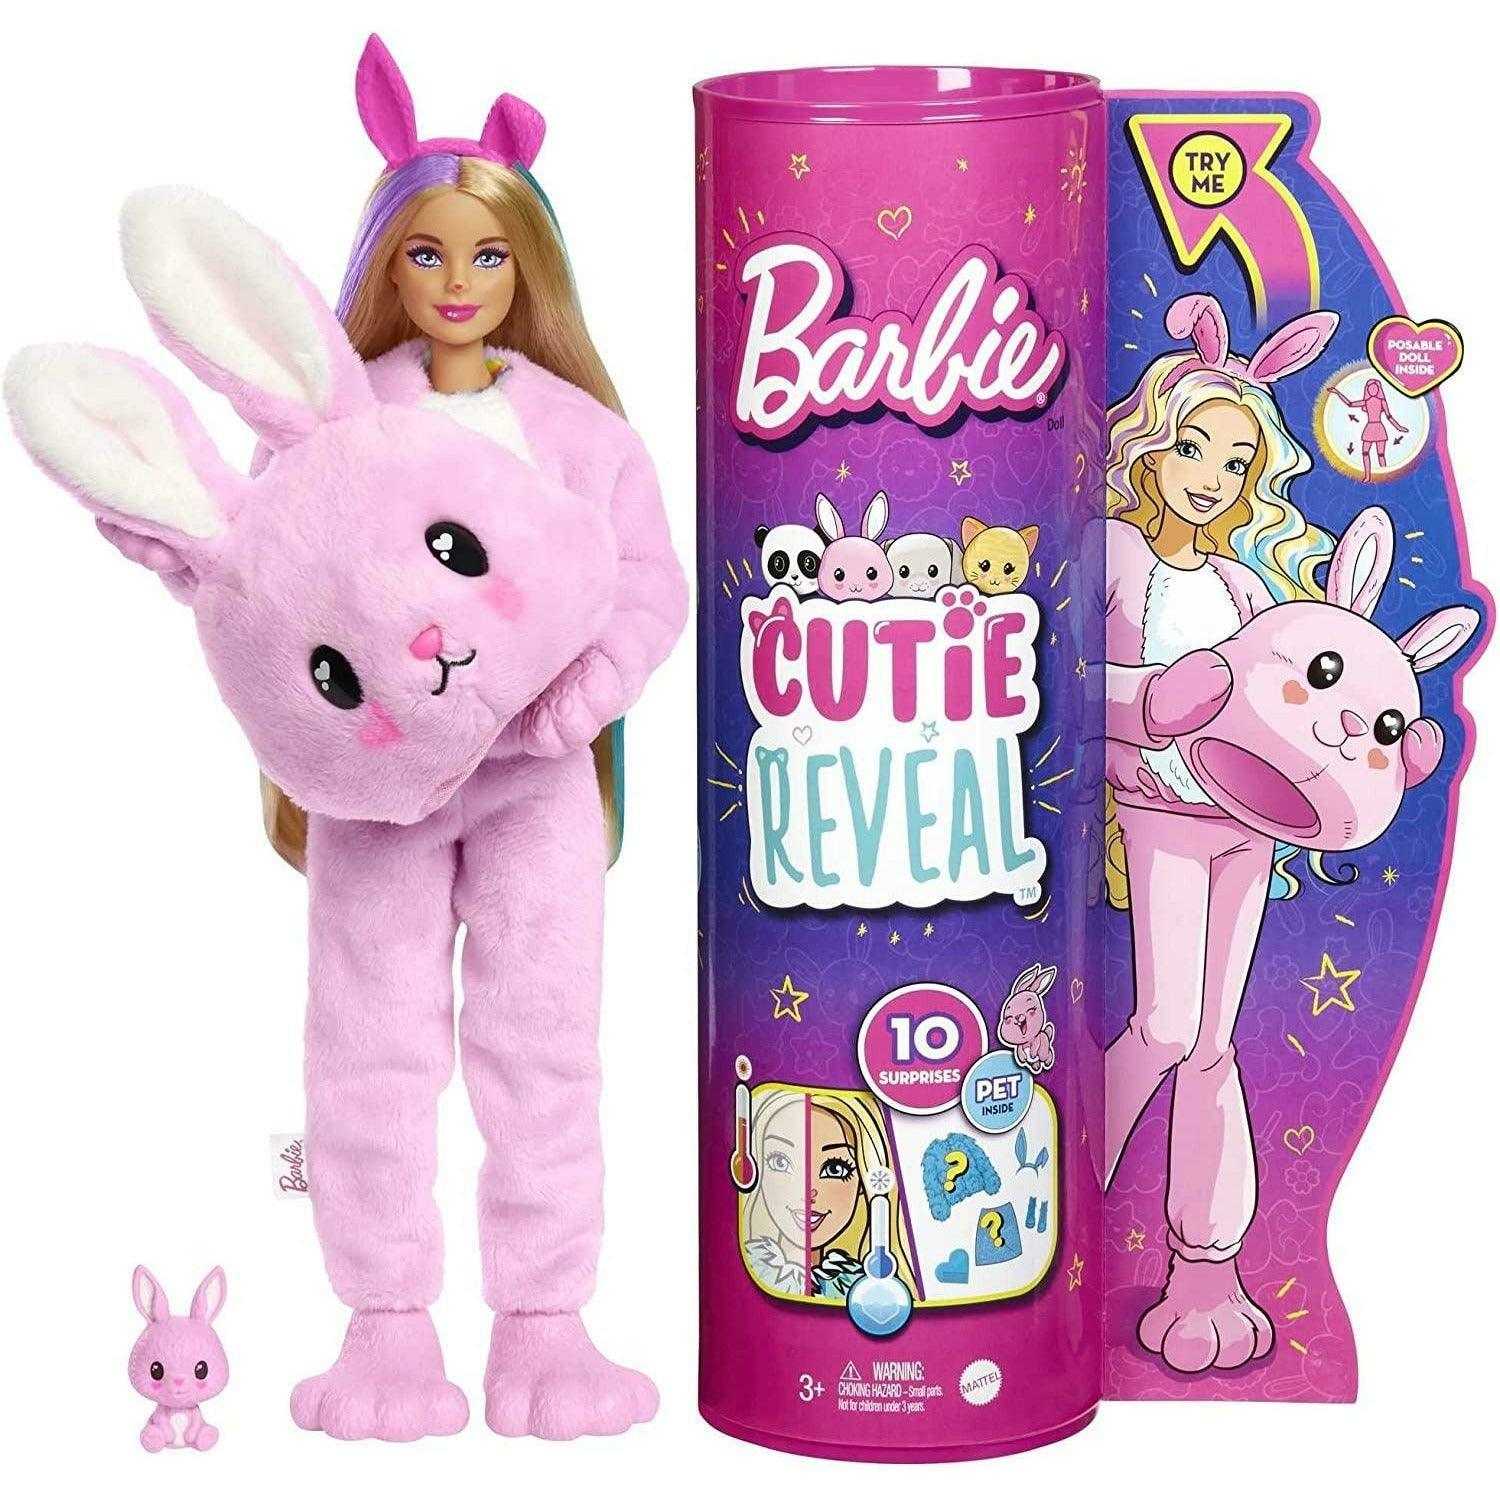 Barbie Cutie Reveal Doll with Bunny Plush Costume & 10 Surprises Including Mini Pet & Color Change - BumbleToys - 5-7 Years, Barbie, Fashion Dolls & Accessories, Girls, OXE, Pre-Order